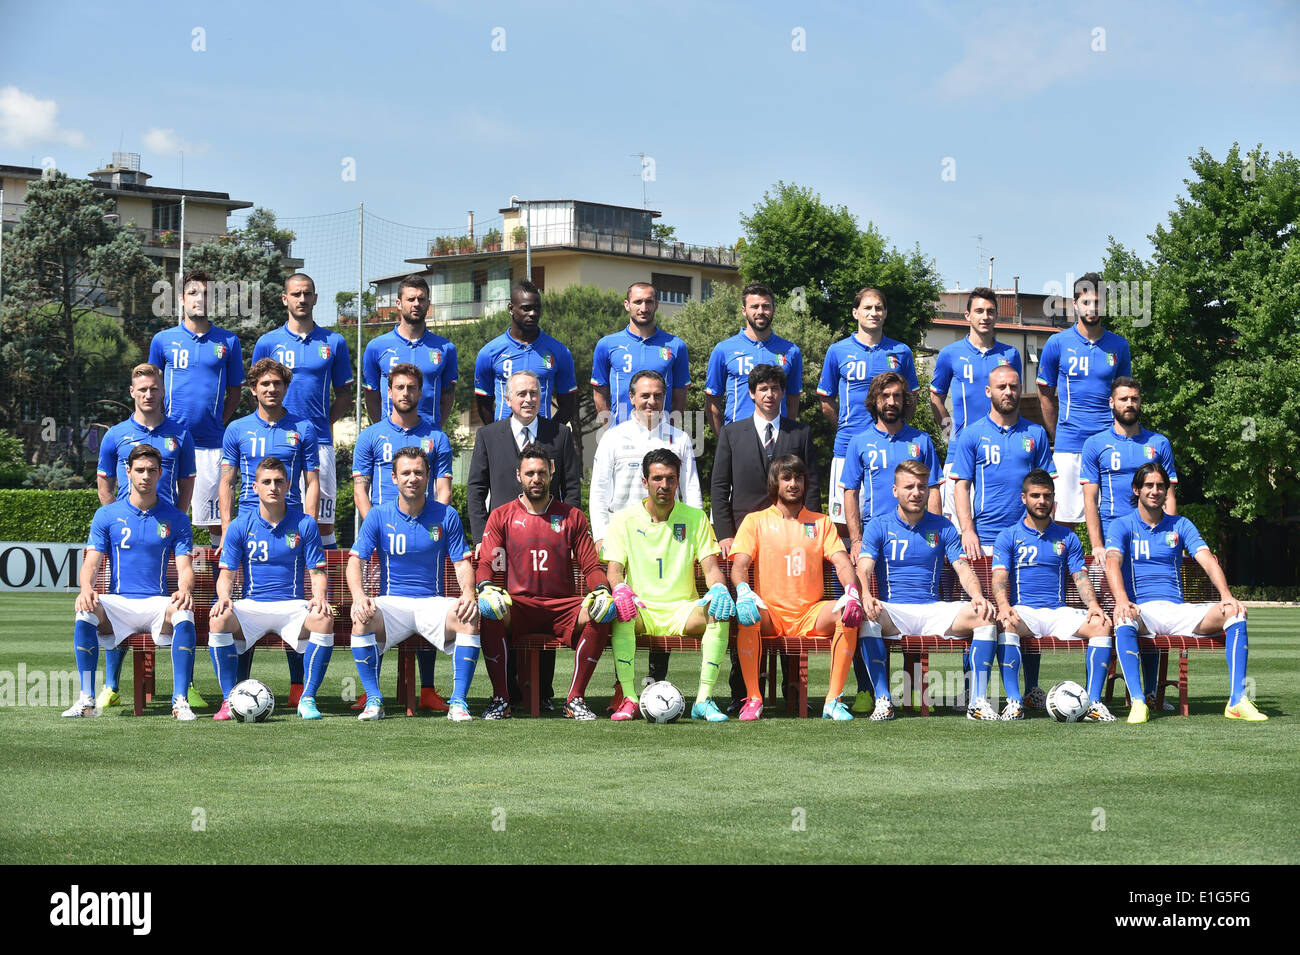 Italy's national soccer team players pose for a photo before their  international friendly soccer match against Luxembourg at Renato Curi  stadium in Perugia June 4, 2014. The players are (back row, L-R)